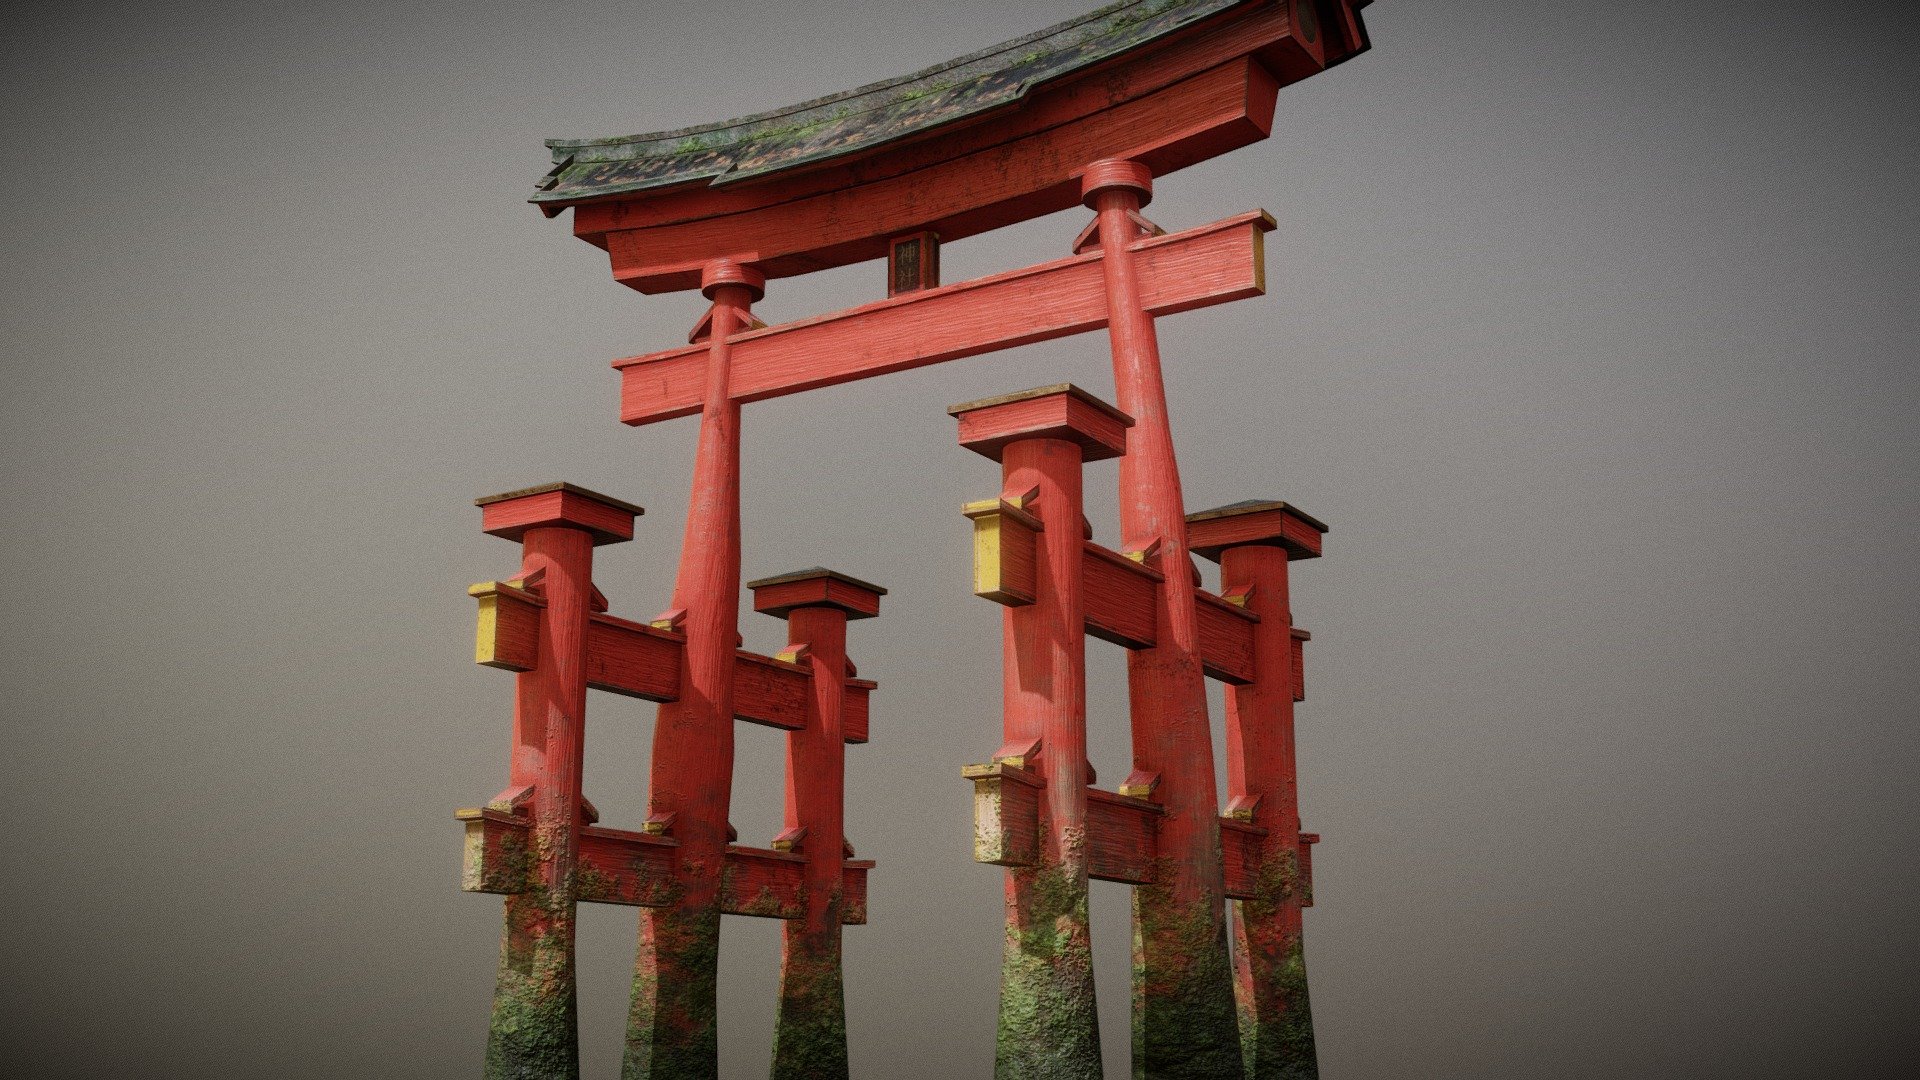 Low Poly model of a japanese Torii.

My insipiration was the Itsukushima shrine Torii.

It was made using Blender, Substance Painter and Adobe Photoshop.

It’s gameready with roughly 3.6k triangles and 1.9k vertices.

If you enjoy this Model please some feedback in the comments!

A torii (Japanese: 鳥居, [to.ɾi.i]) is a traditional Japanese gate most commonly found at the entrance of or within a Shinto shrine, where it symbolically marks the transition from the mundane to the sacred.

The presence of a torii at the entrance is usually the simplest way to identify Shinto shrines, and a small torii icon represents them on Japanese road maps.

https://en.wikipedia.org/wiki/Torii

Follow me on:

Artsation: https://www.artstation.com/andereberna Instagram: https://www.instagram.com/a.bernardo_artwork/ - Japanese Torii - 3D model by André Bernardo (@andereberna) 3d model